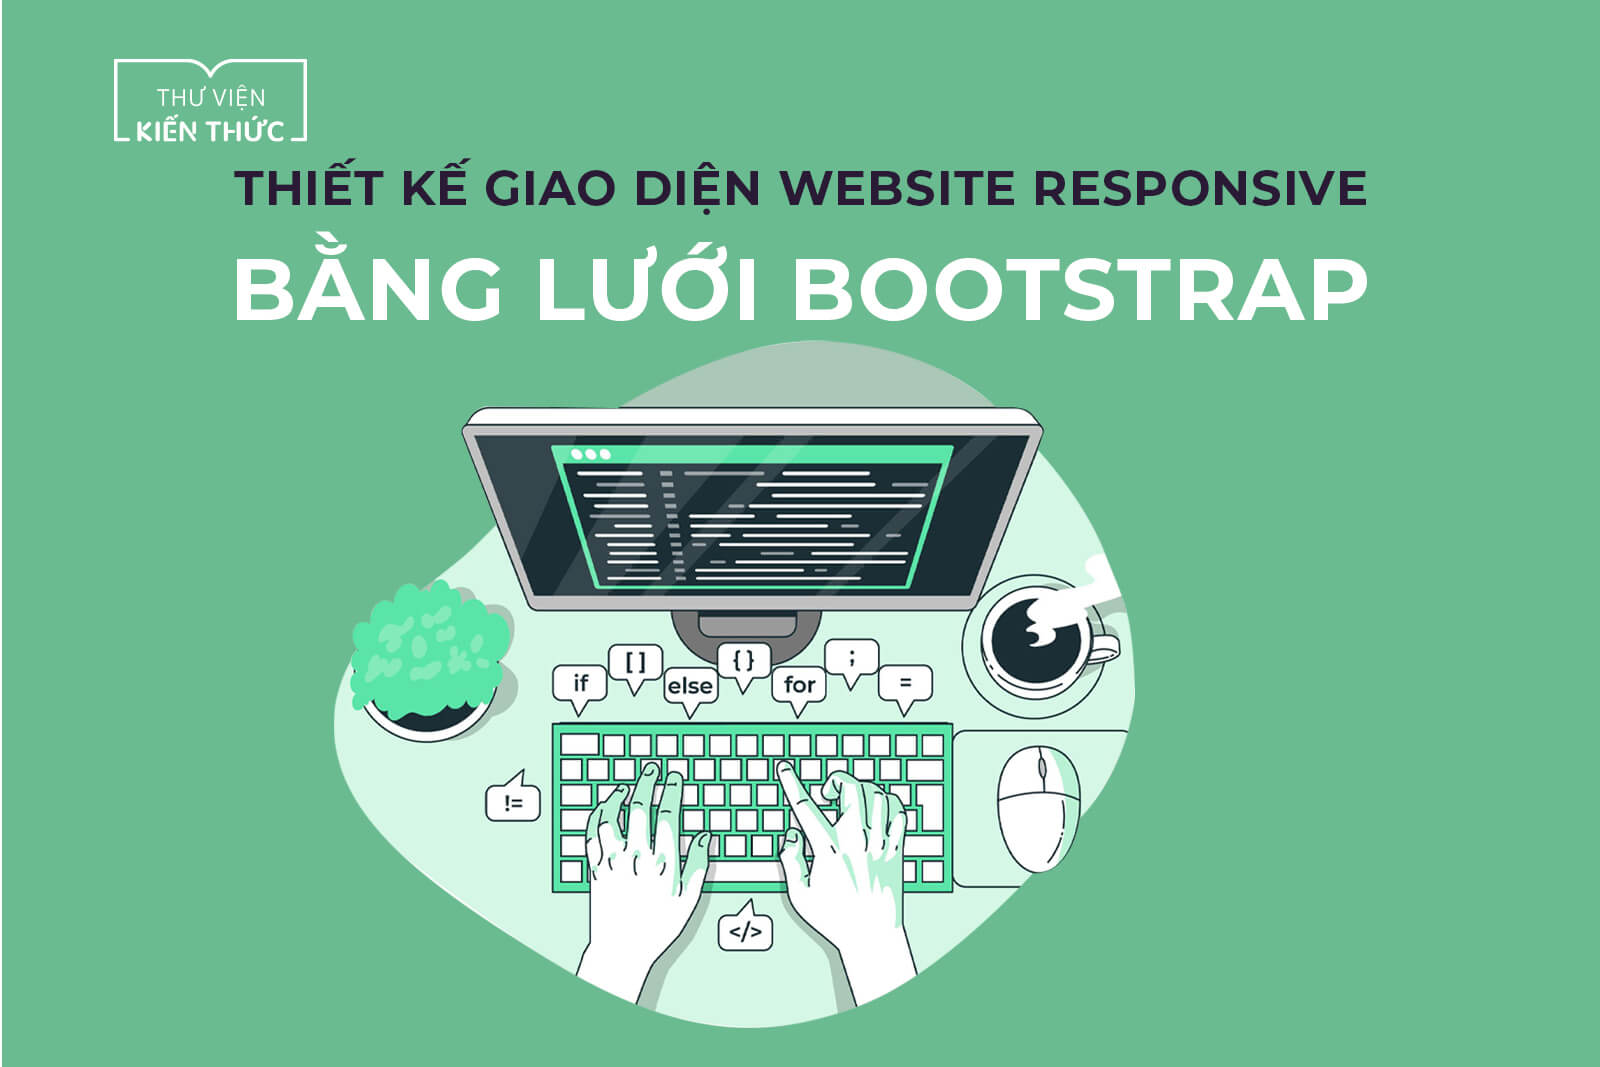 Thiết kế giao diện website responsive bằng lưới Bootstrap